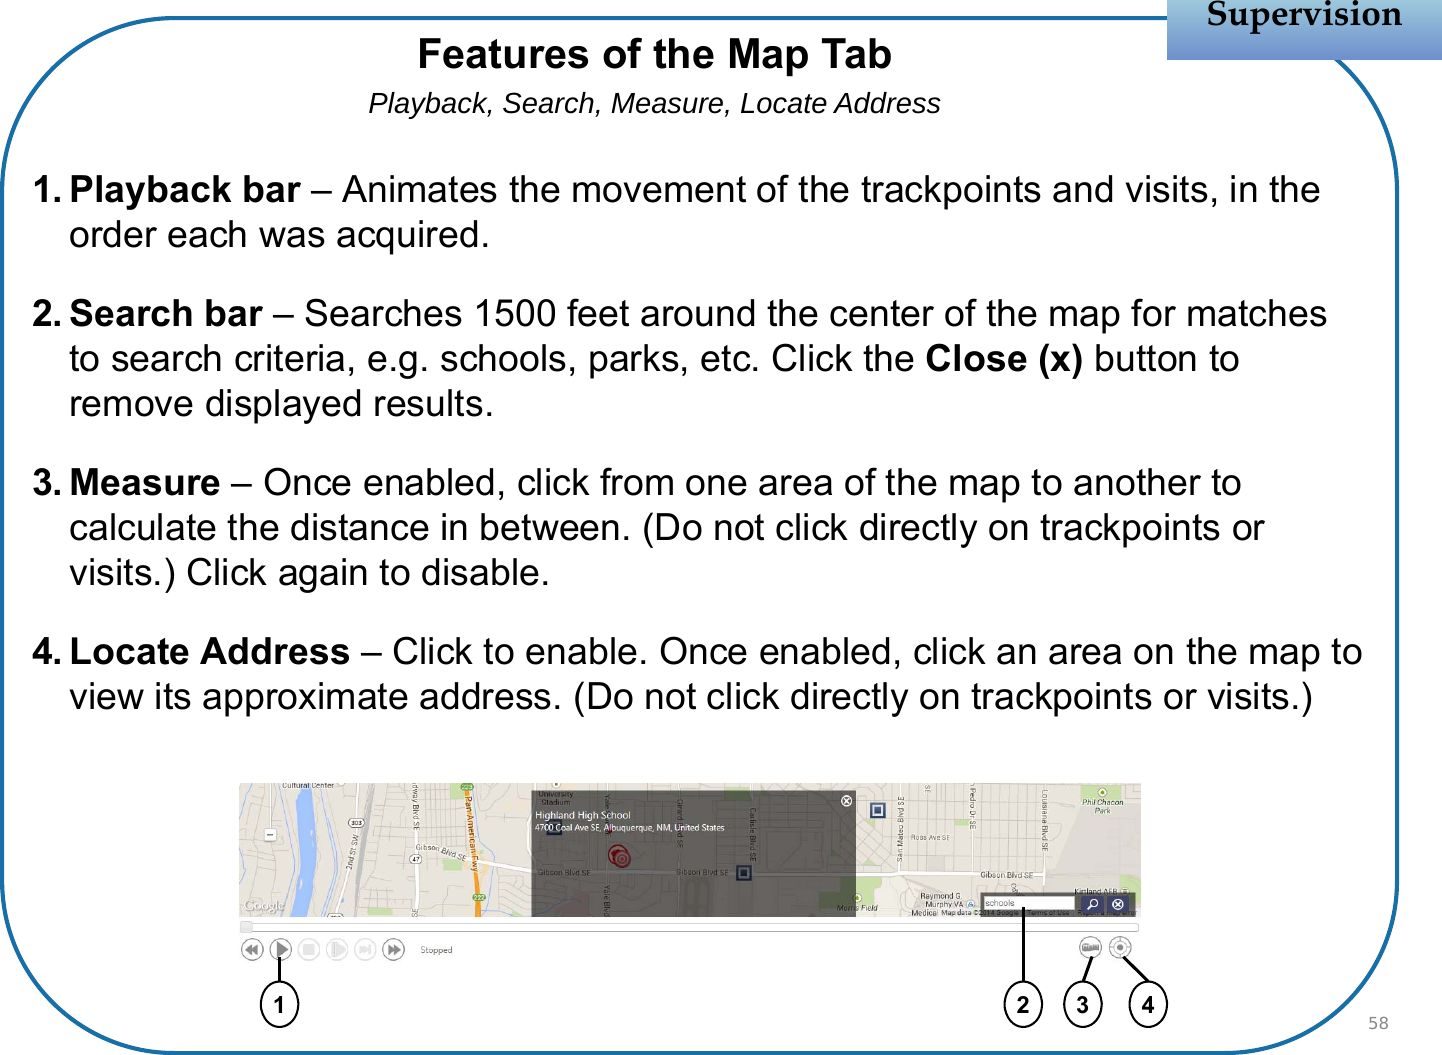 1. Playback bar – Animates the movement of the trackpoints and visits, in the order each was acquired.2. Search bar – Searches 1500 feet around the center of the map for matches to search criteria, e.g. schools, parks, etc. Click the Close (x) button to remove displayed results.3. Measure – Once enabled, click from one area of the map to another to calculate the distance in between. (Do not click directly on trackpoints or visits.) Click again to disable.4. Locate Address – Click to enable. Once enabled, click an area on the map to view its approximate address. (Do not click directly on trackpoints or visits.)SupervisionSupervision58Features of the Map TabPlayback, Search, Measure, Locate Address1 42 3